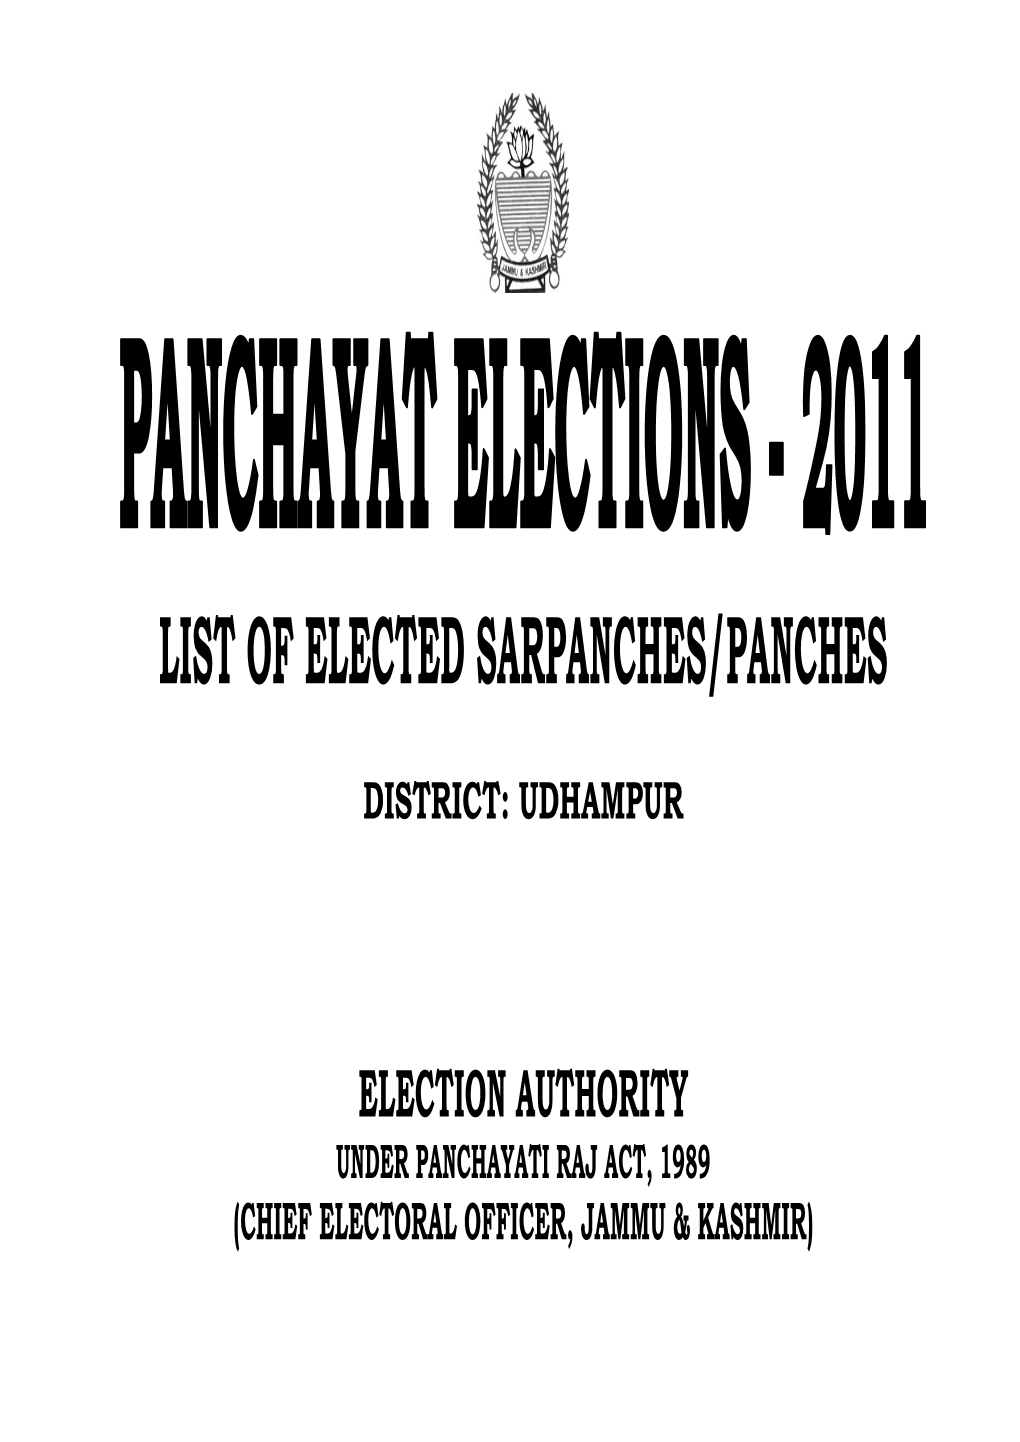 List of Elected Sarpanches/Panches